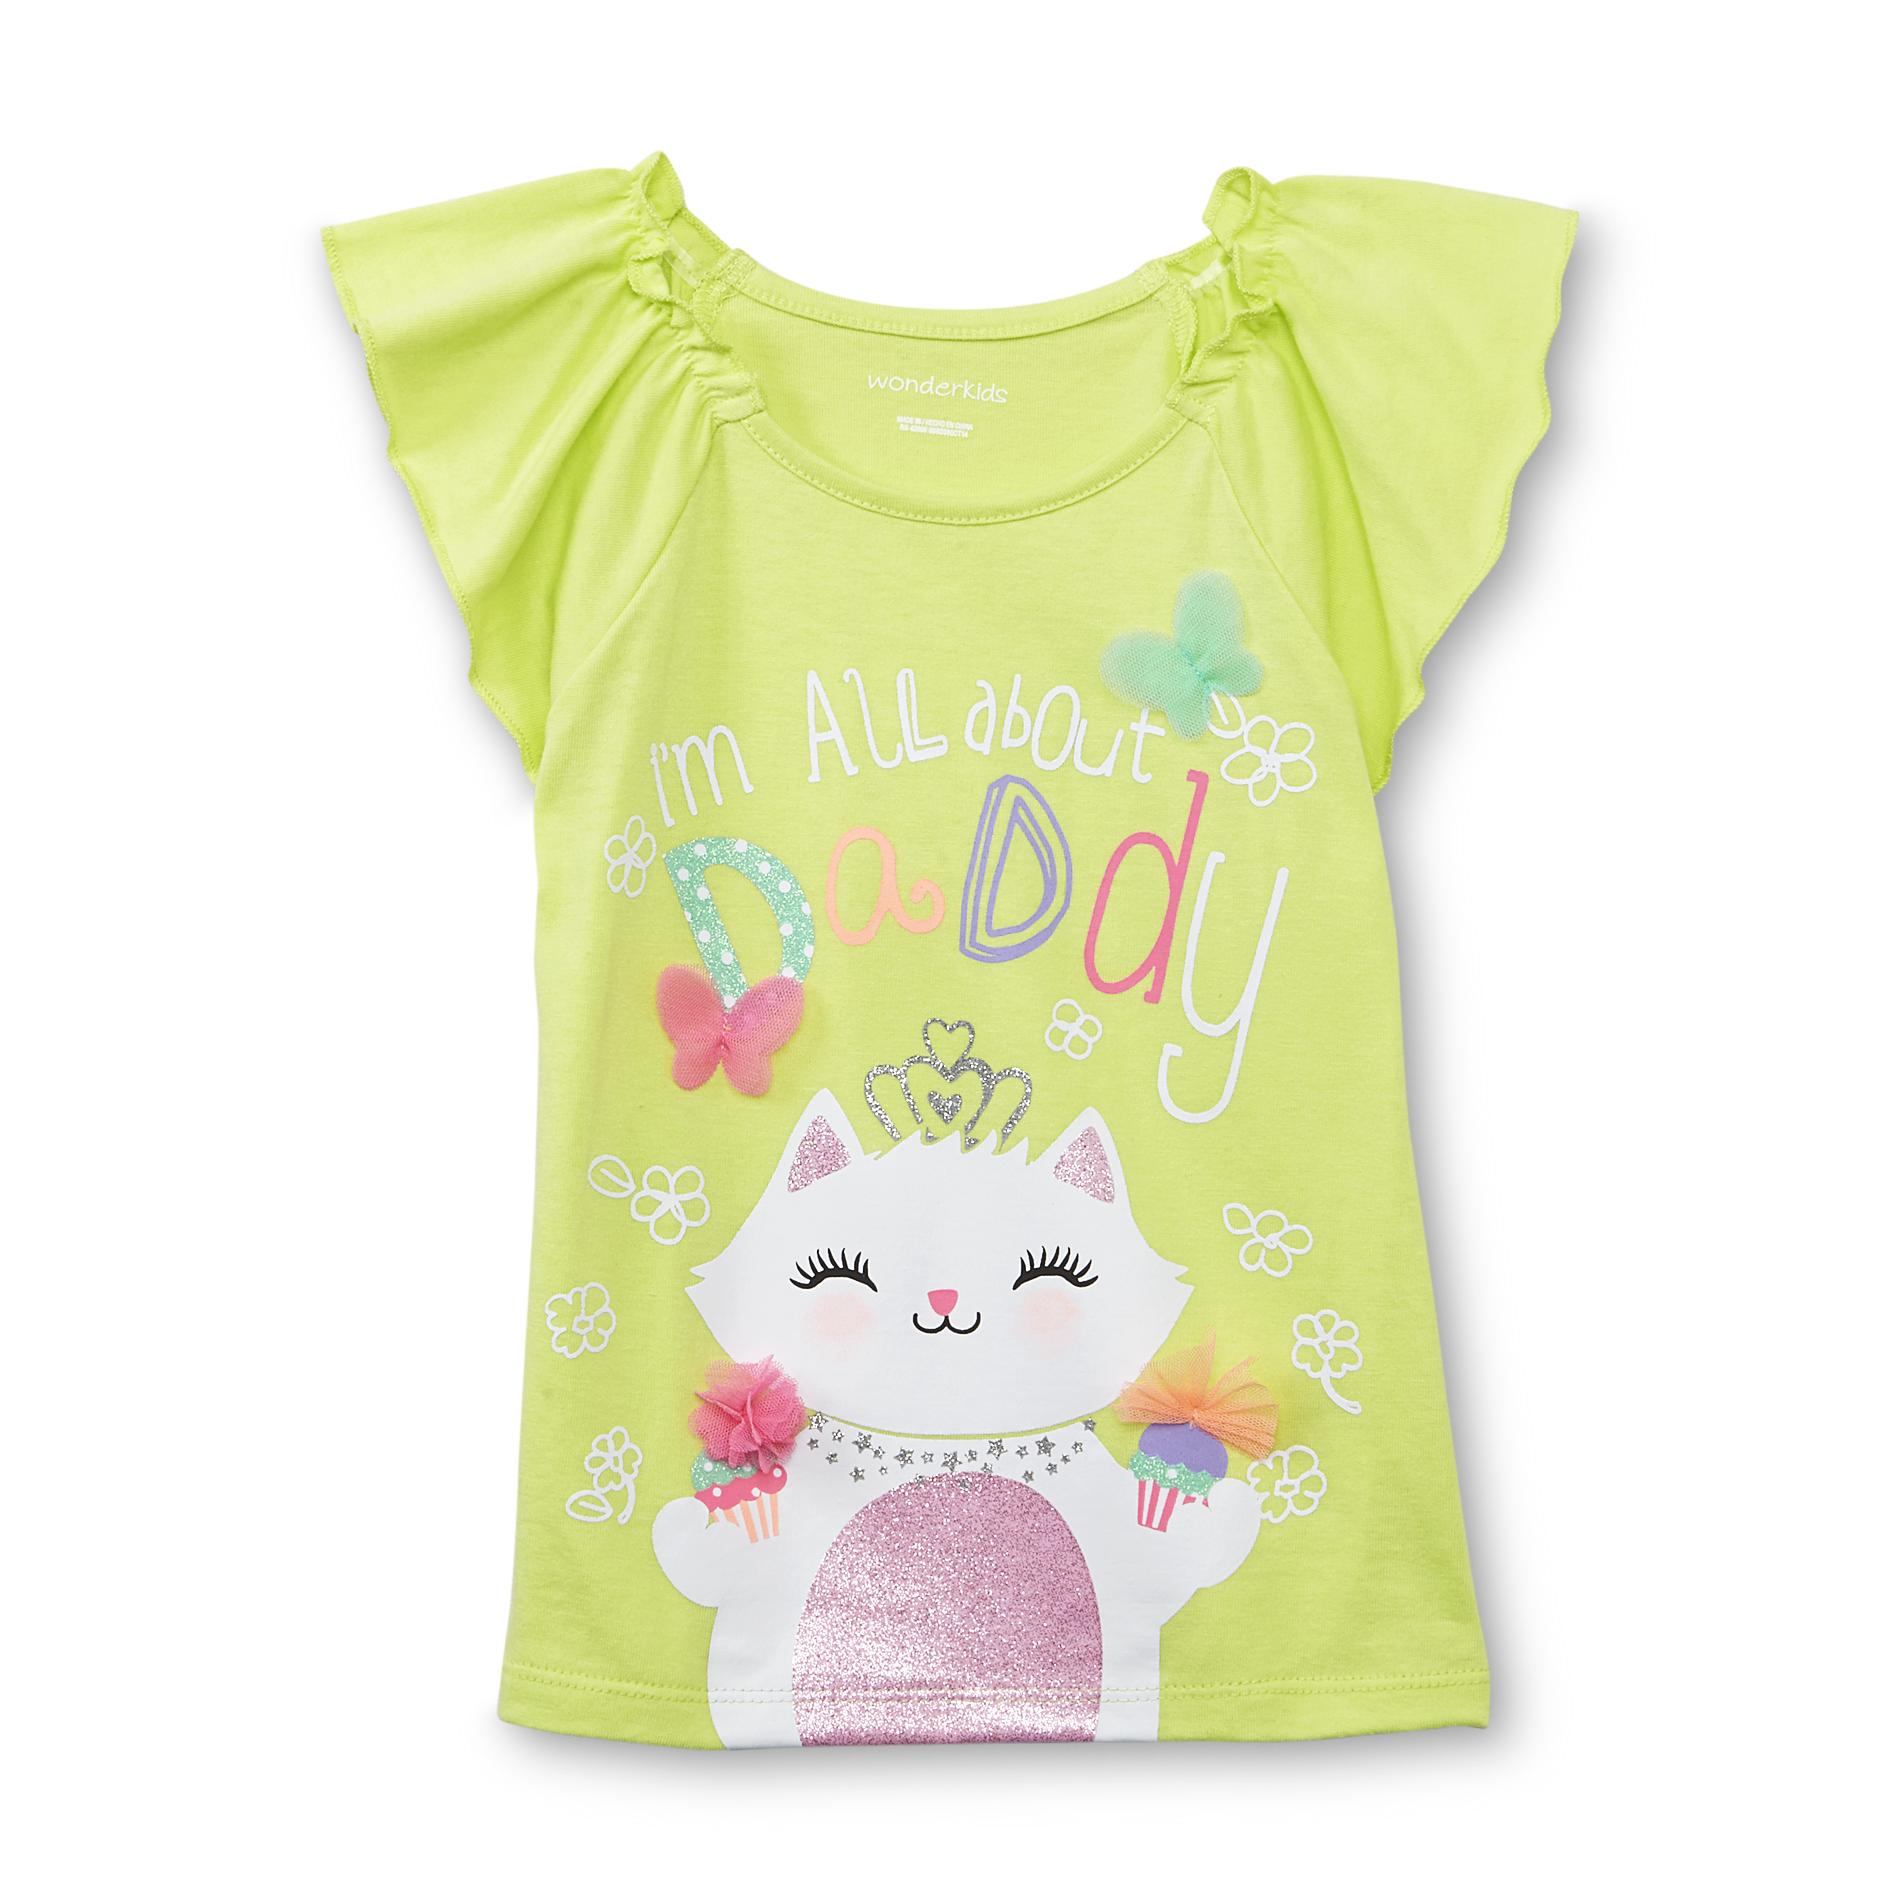 WonderKids Infant & Toddler Girl's Embellished Top - All About Daddy